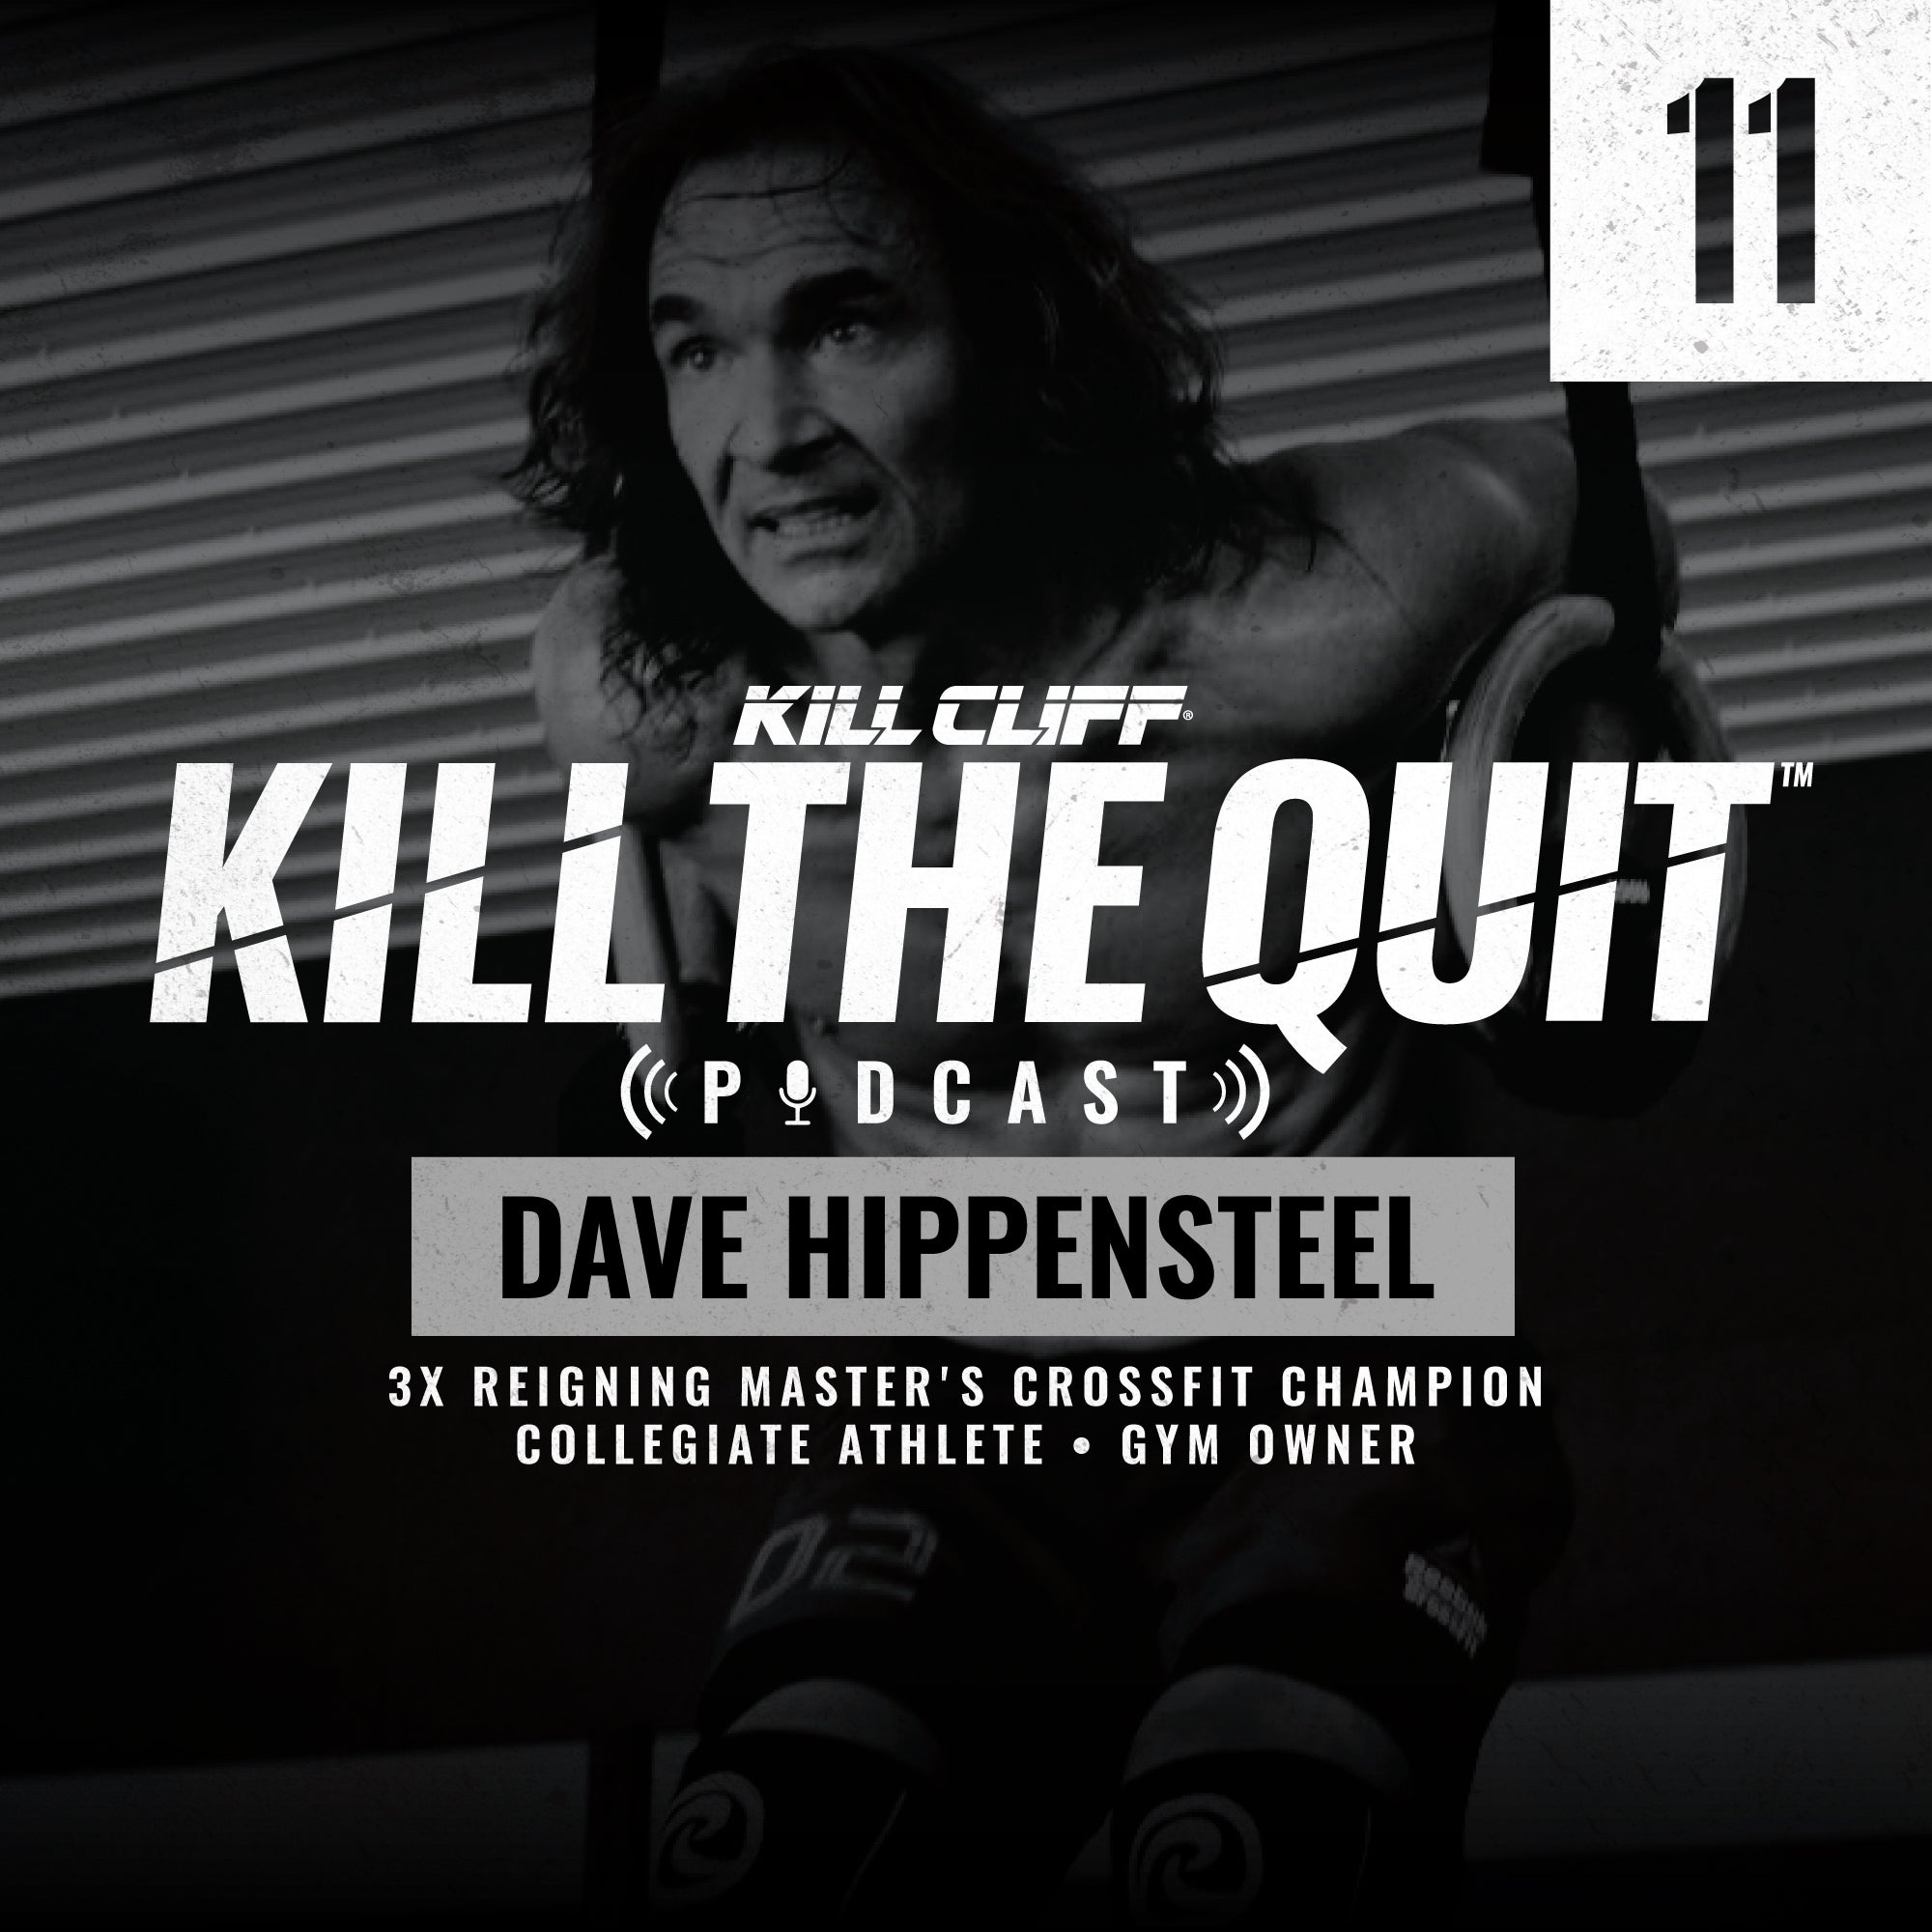 PODCAST Ep. 011 - Dave Hippensteel - Kill Cliff